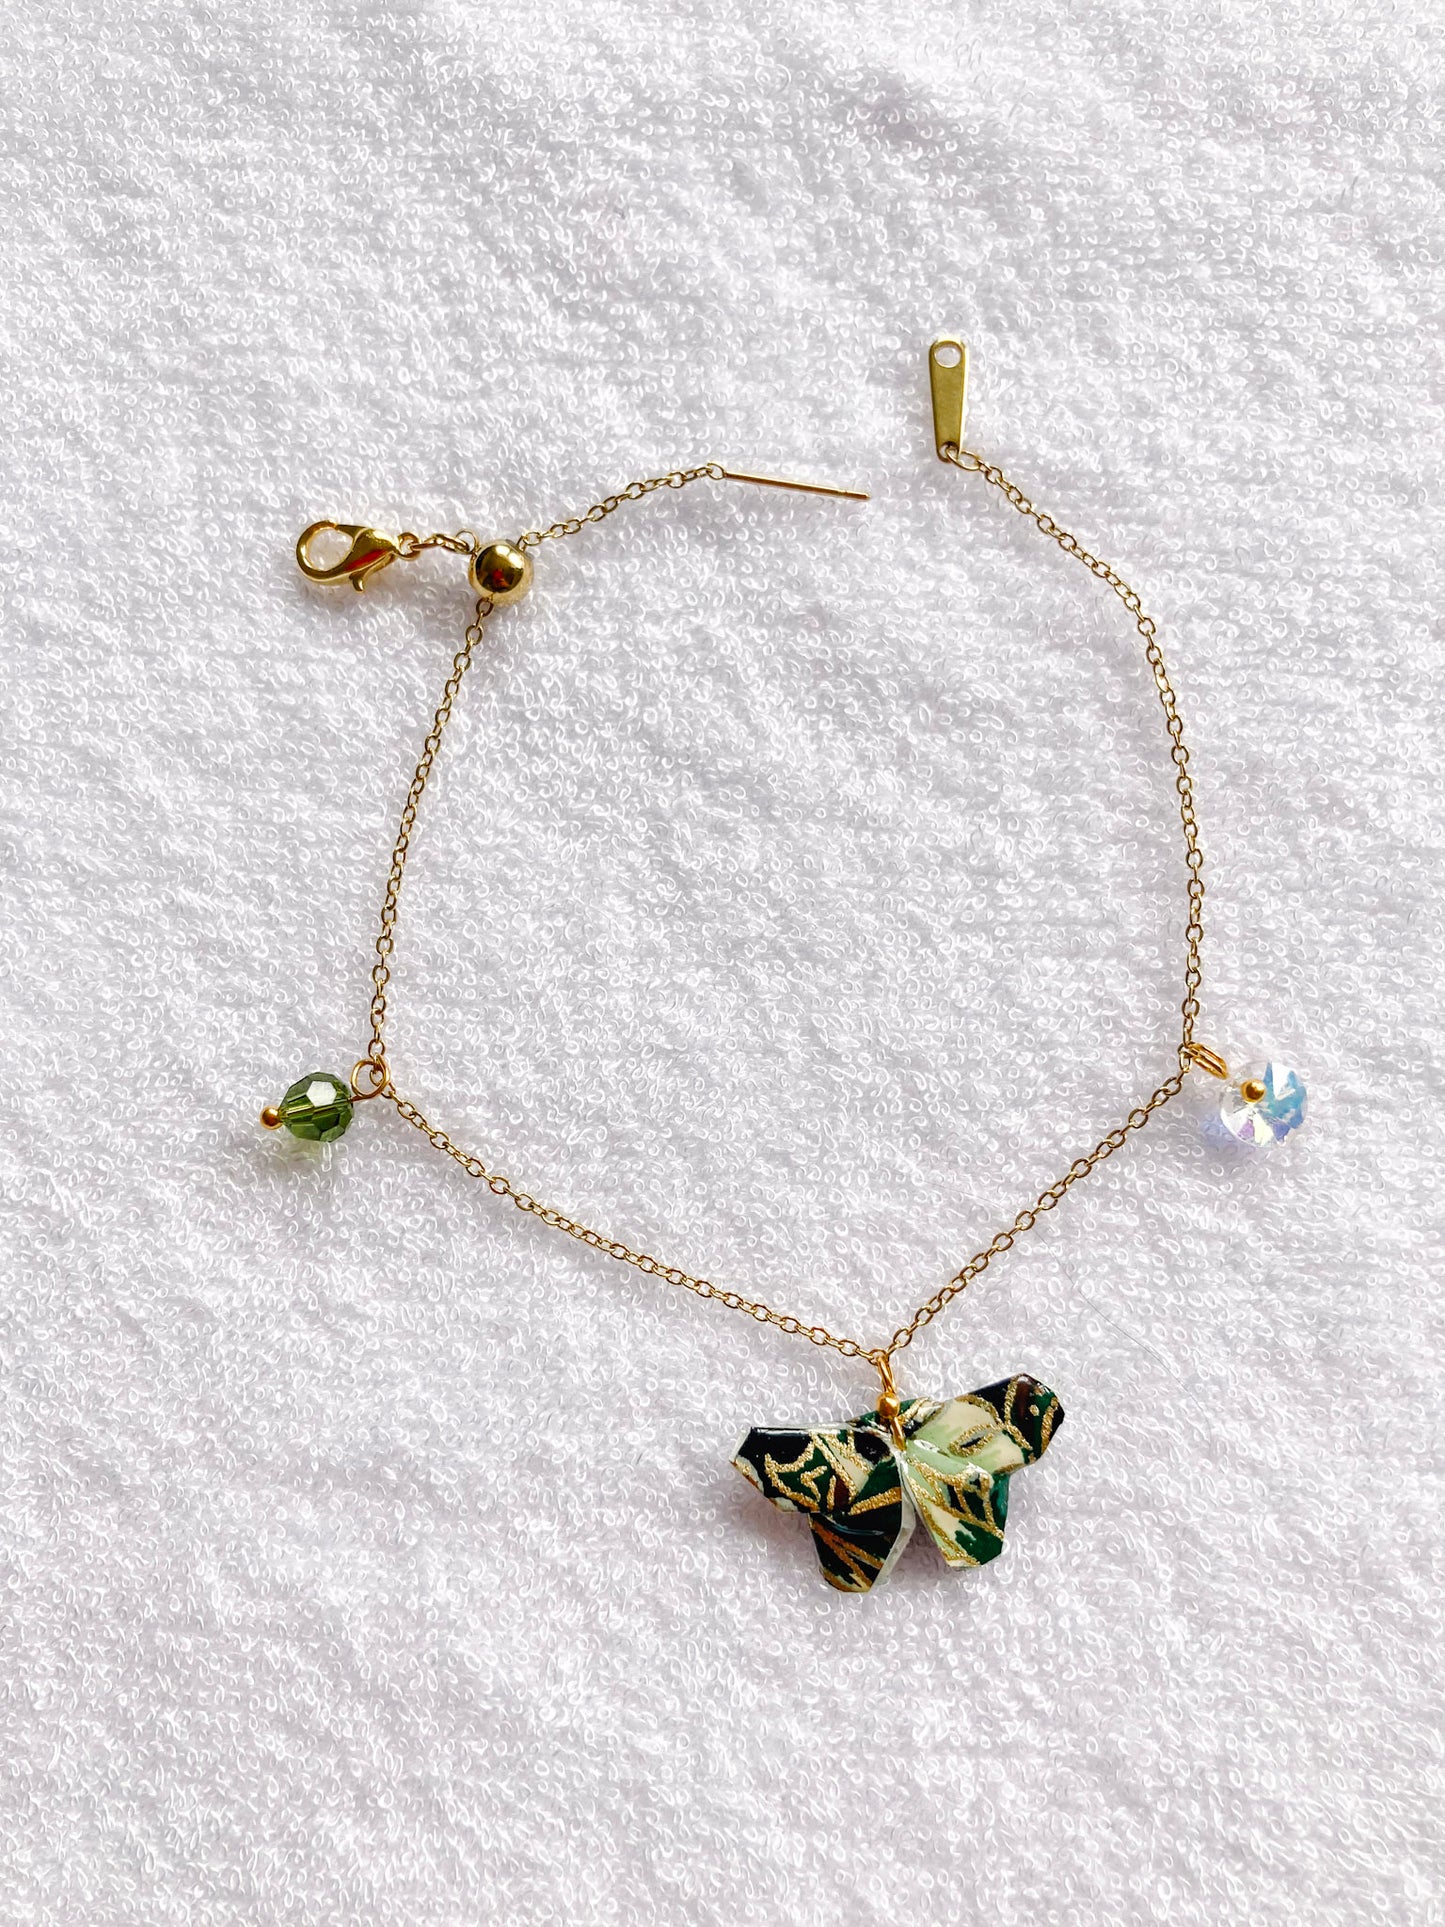 Origami Bracelet - Green Paper Butterfly, Gold Chain, Swarovski Crystals